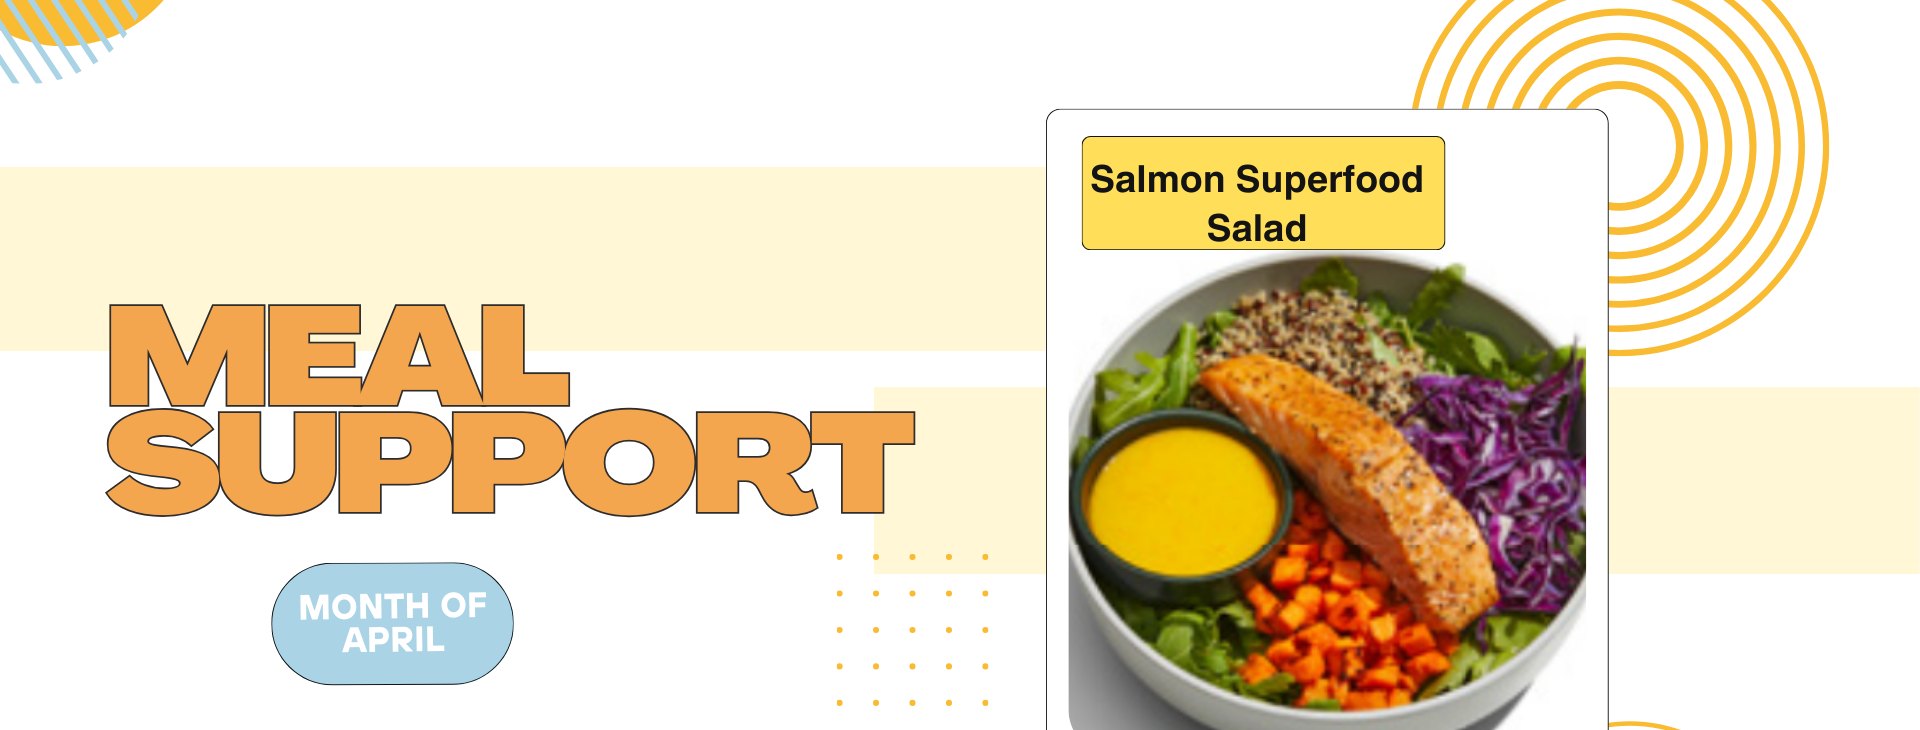 Meal Support- Salmon Salad